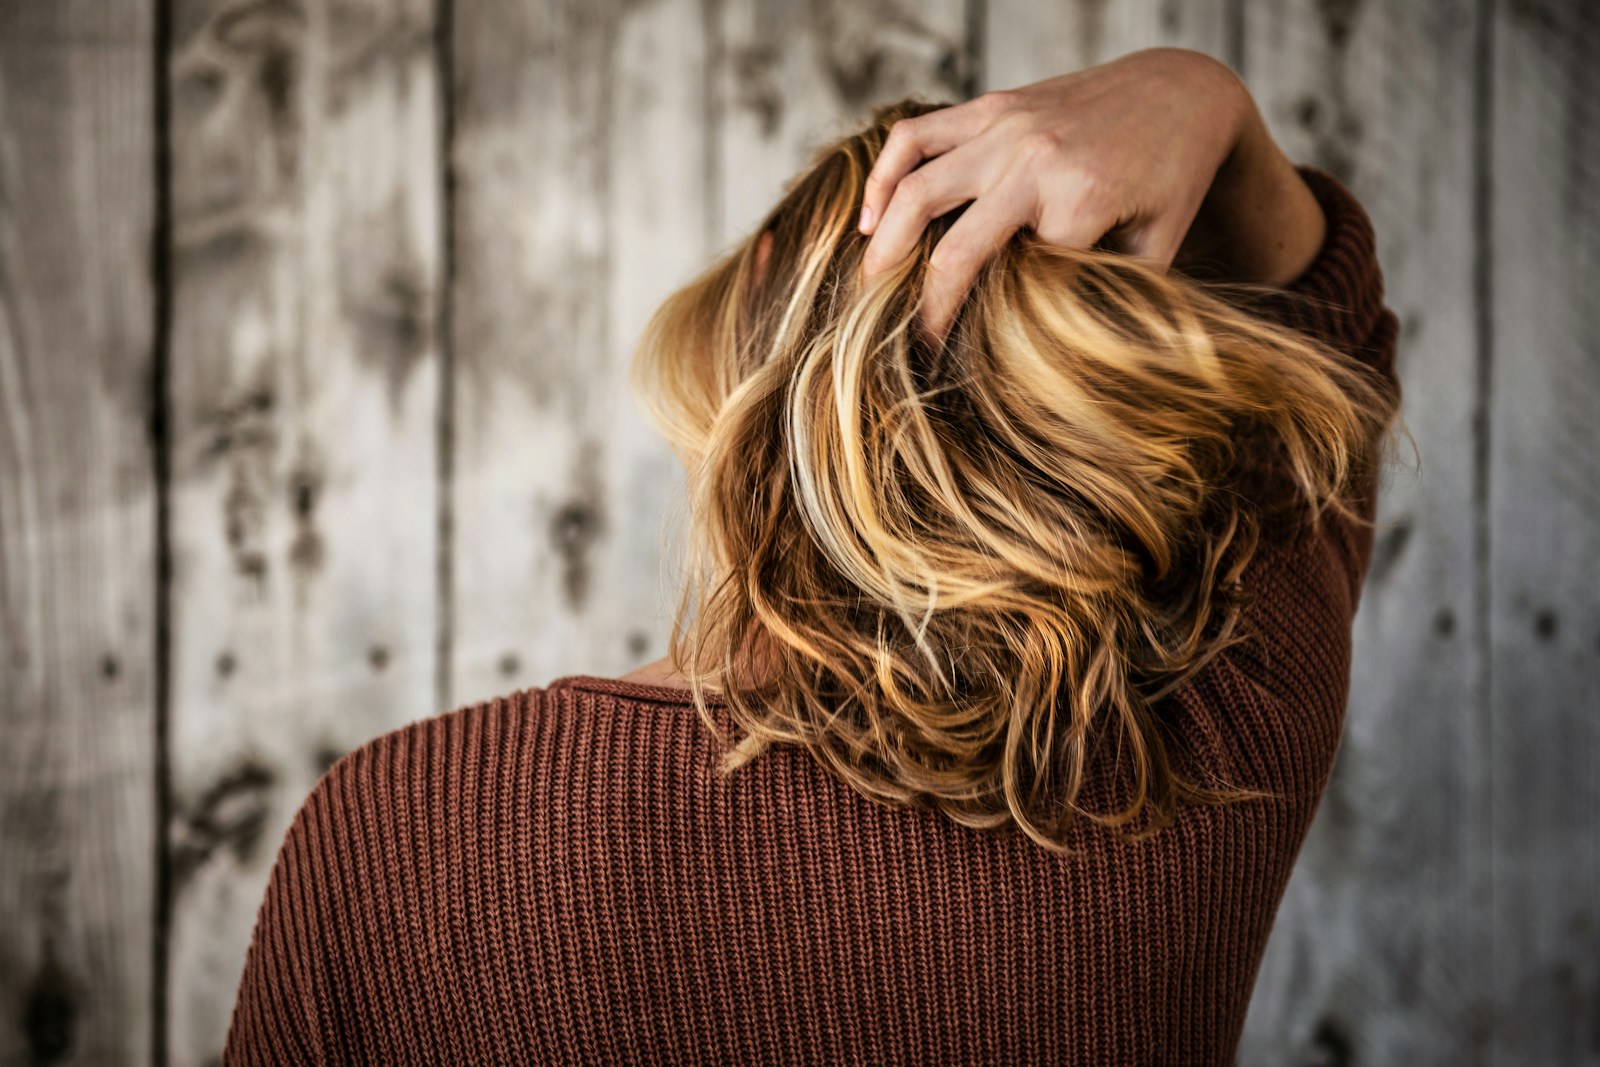 Can CBD Help With Winter Hair Care